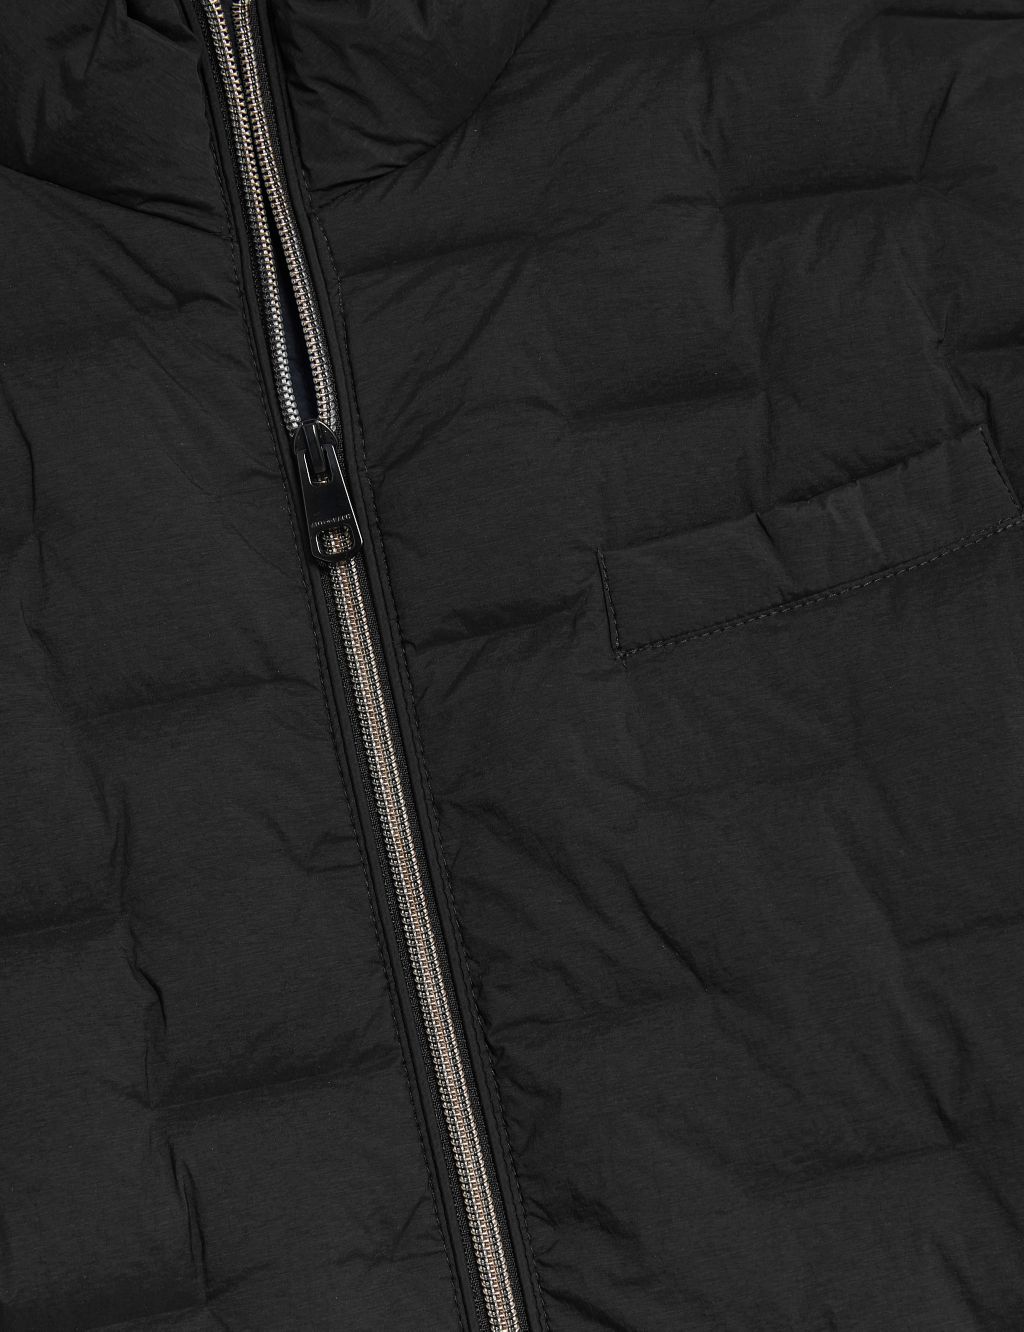 Feather and Down Textured Jacket image 7